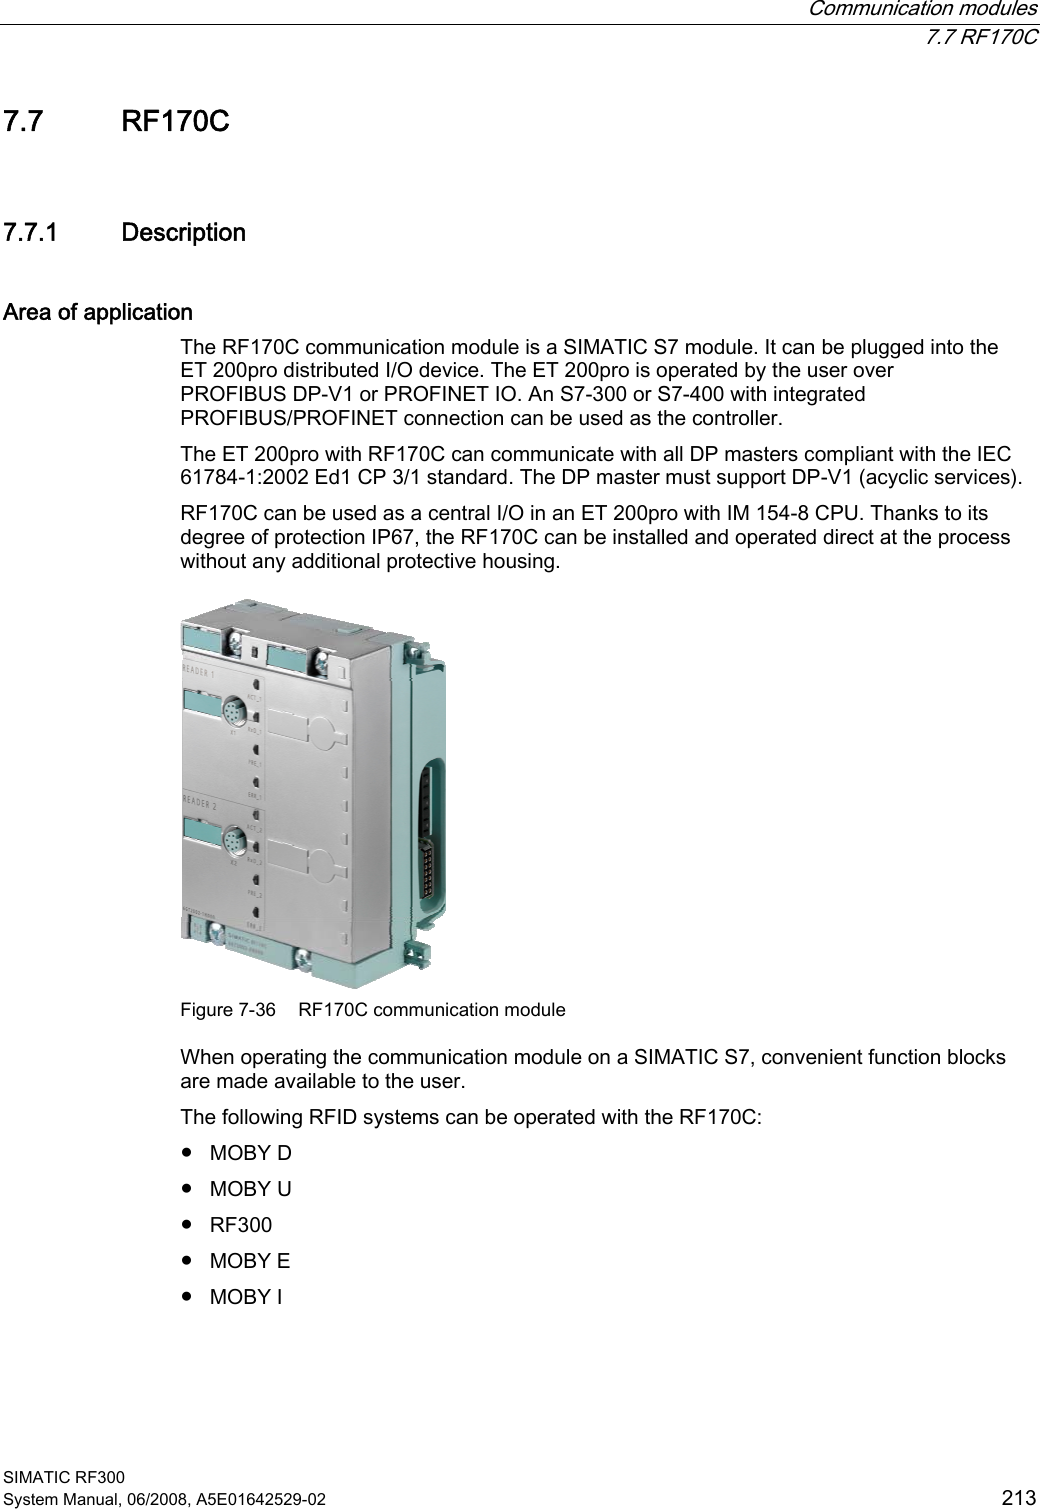  Communication modules  7.7 RF170C SIMATIC RF300 System Manual, 06/2008, A5E01642529-02  213 7.7 RF170C 7.7.1 Description Area of application The RF170C communication module is a SIMATIC S7 module. It can be plugged into the ET 200pro distributed I/O device. The ET 200pro is operated by the user over PROFIBUS DP-V1 or PROFINET IO. An S7-300 or S7-400 with integrated PROFIBUS/PROFINET connection can be used as the controller.  The ET 200pro with RF170C can communicate with all DP masters compliant with the IEC 61784-1:2002 Ed1 CP 3/1 standard. The DP master must support DP-V1 (acyclic services). RF170C can be used as a central I/O in an ET 200pro with IM 154-8 CPU. Thanks to its degree of protection IP67, the RF170C can be installed and operated direct at the process without any additional protective housing.  Figure 7-36  RF170C communication module When operating the communication module on a SIMATIC S7, convenient function blocks are made available to the user. The following RFID systems can be operated with the RF170C: ● MOBY D ● MOBY U ● RF300 ● MOBY E ● MOBY I 